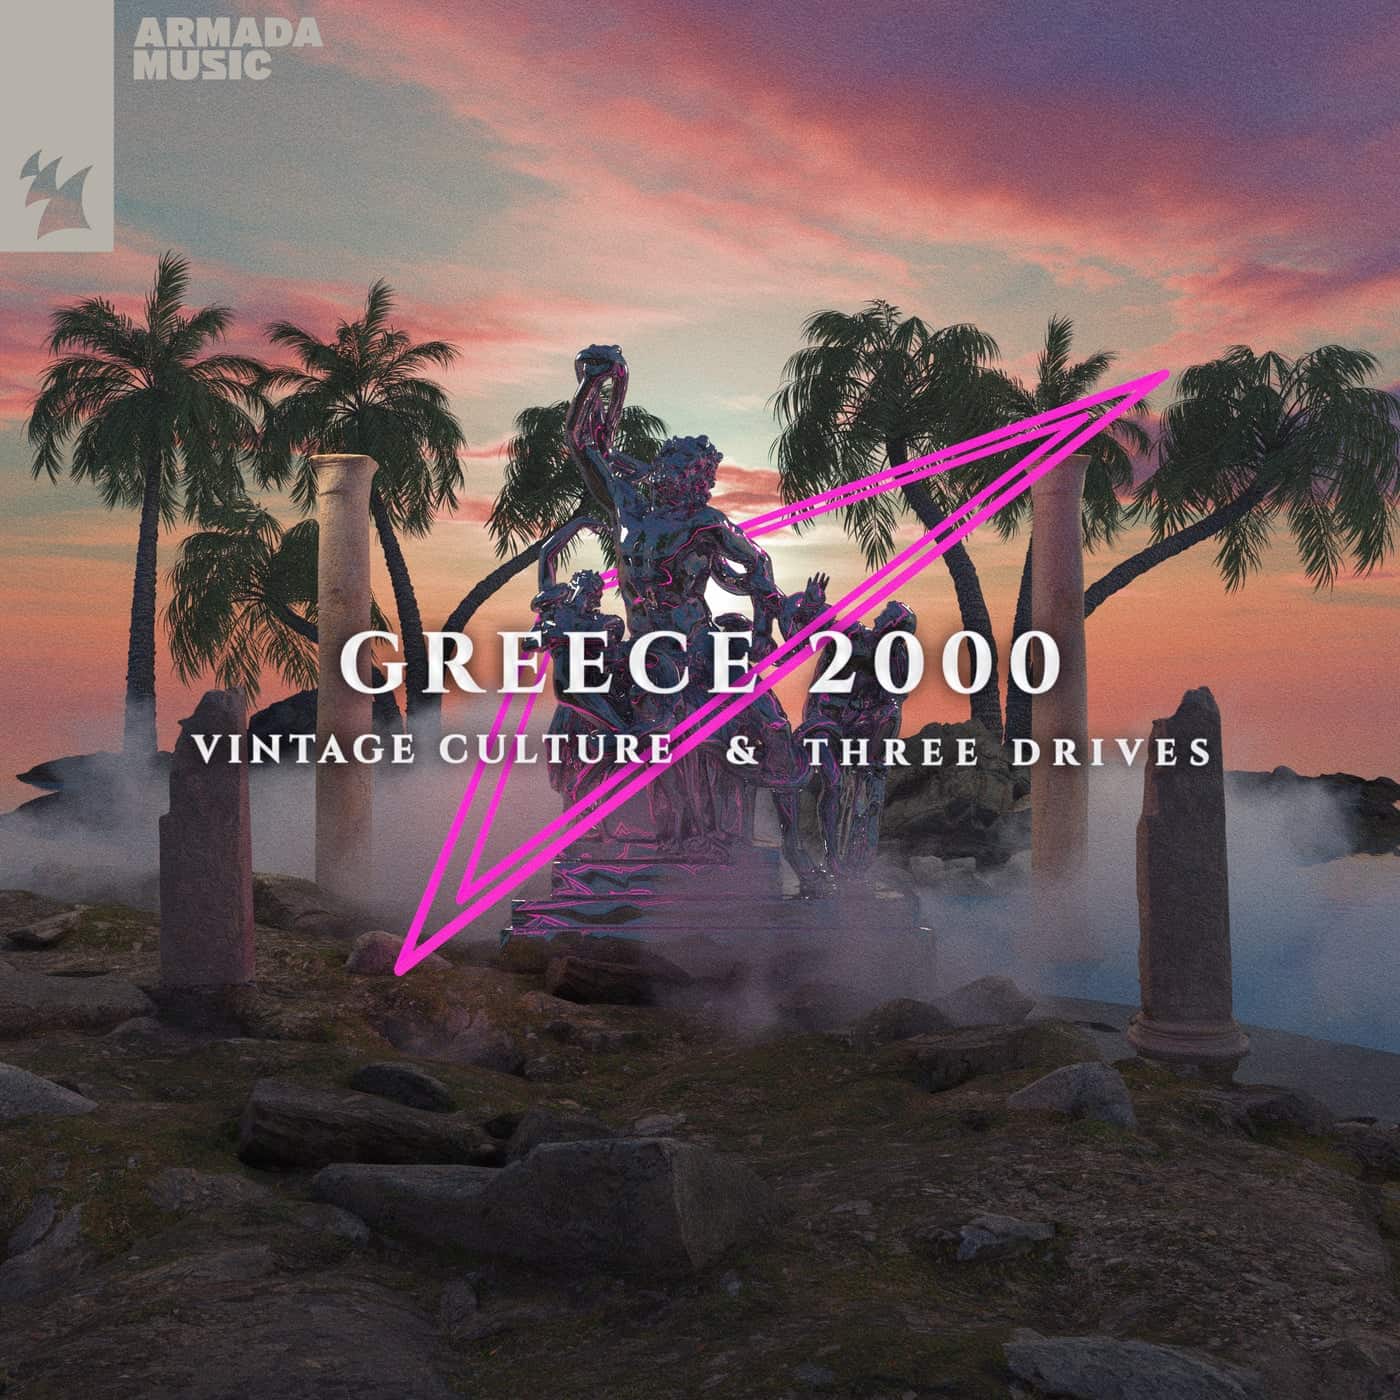 Download Three Drives, Three Drives On A Vinyl, Vintage Culture - Greece 2000